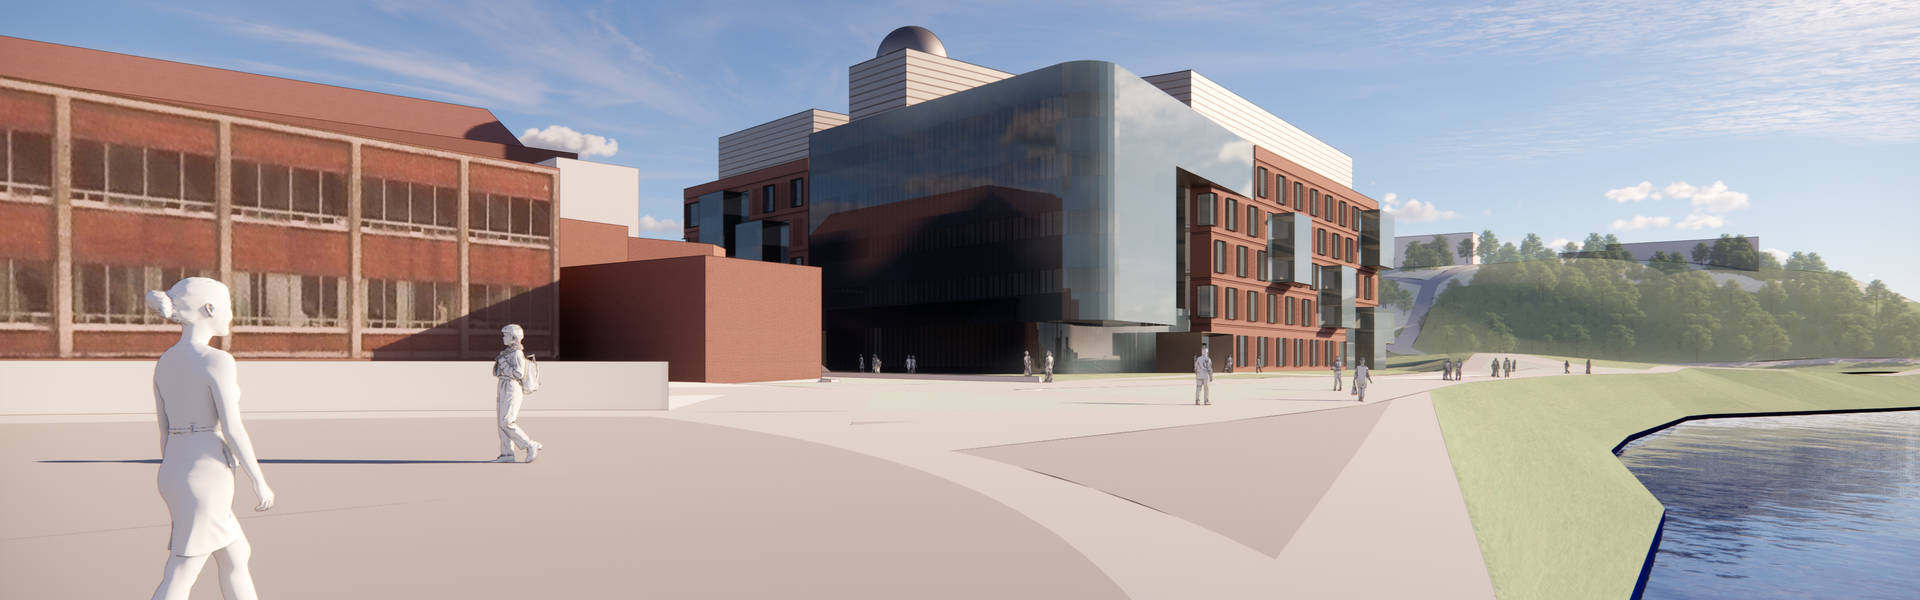 Health and Health Sciences Building Rendering 2